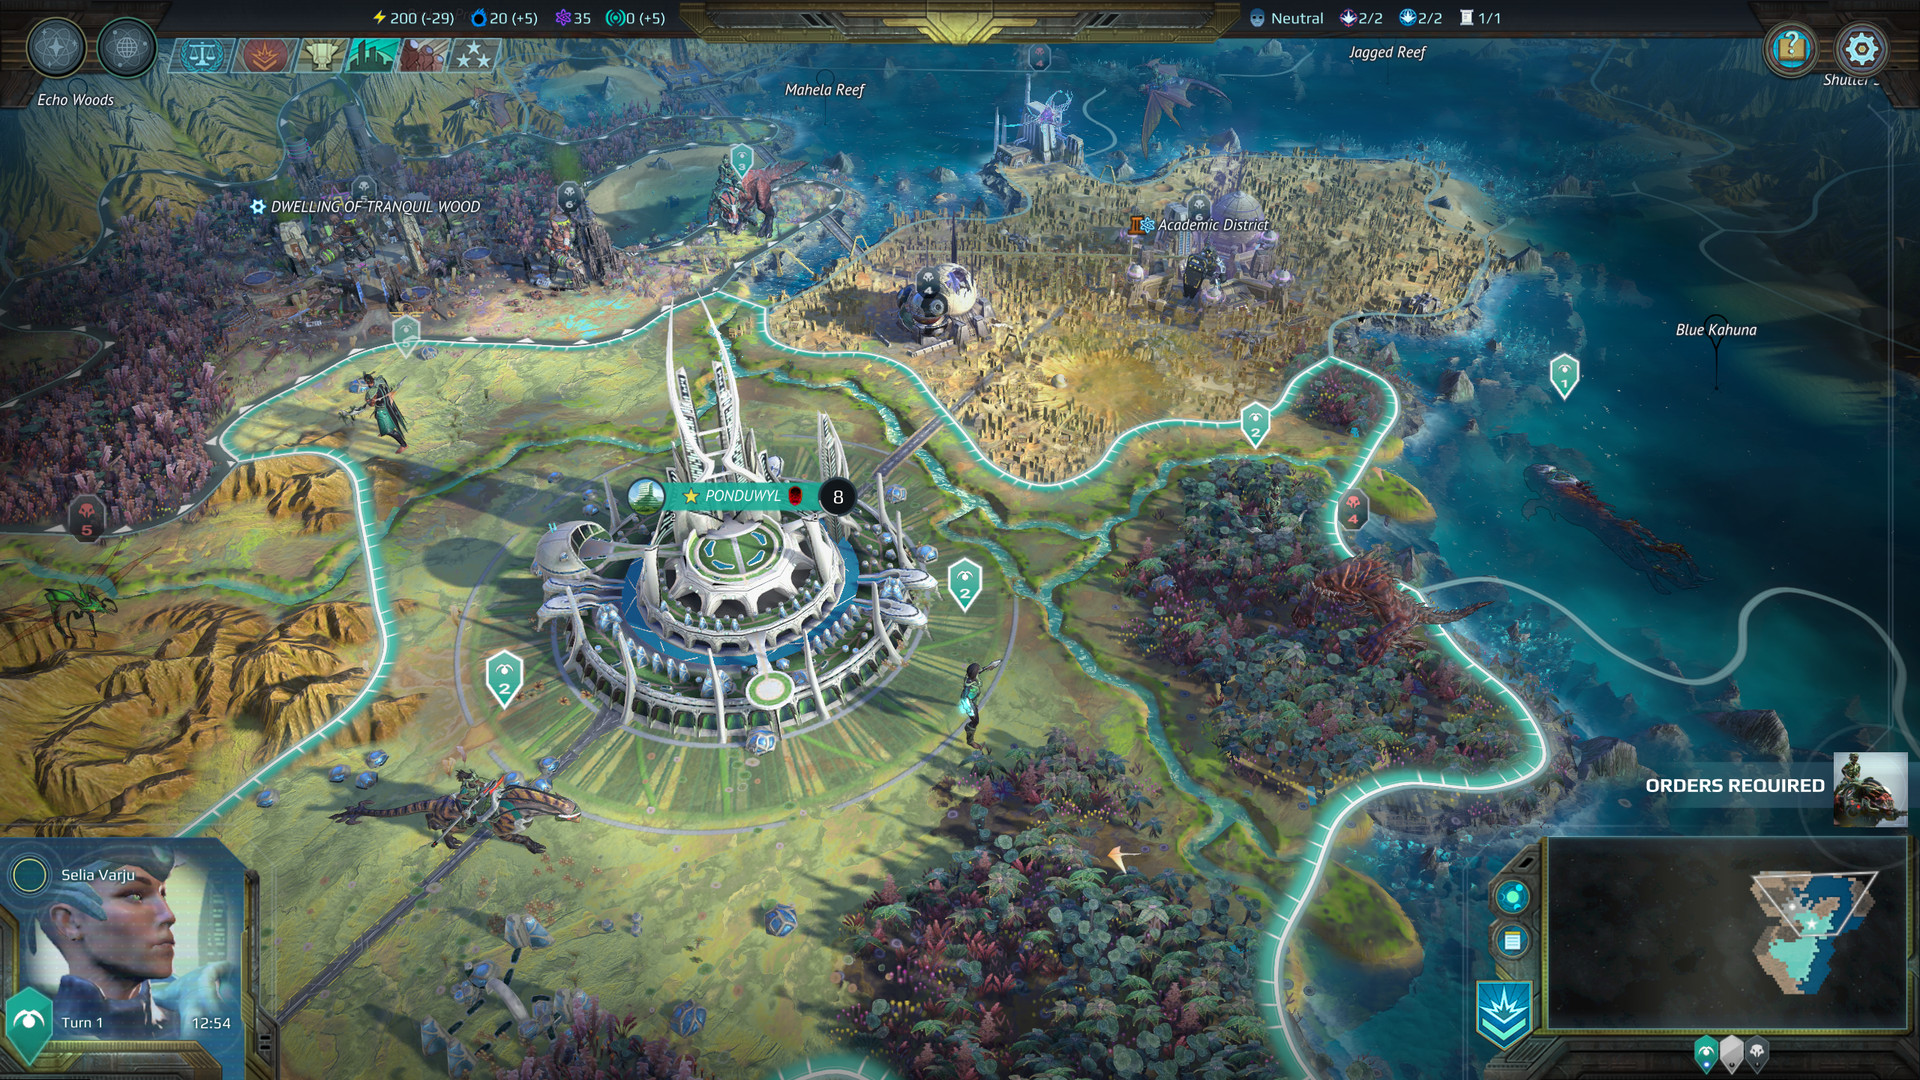 Age of Wonders: Planetfall - PS4 - Compra jogos online na